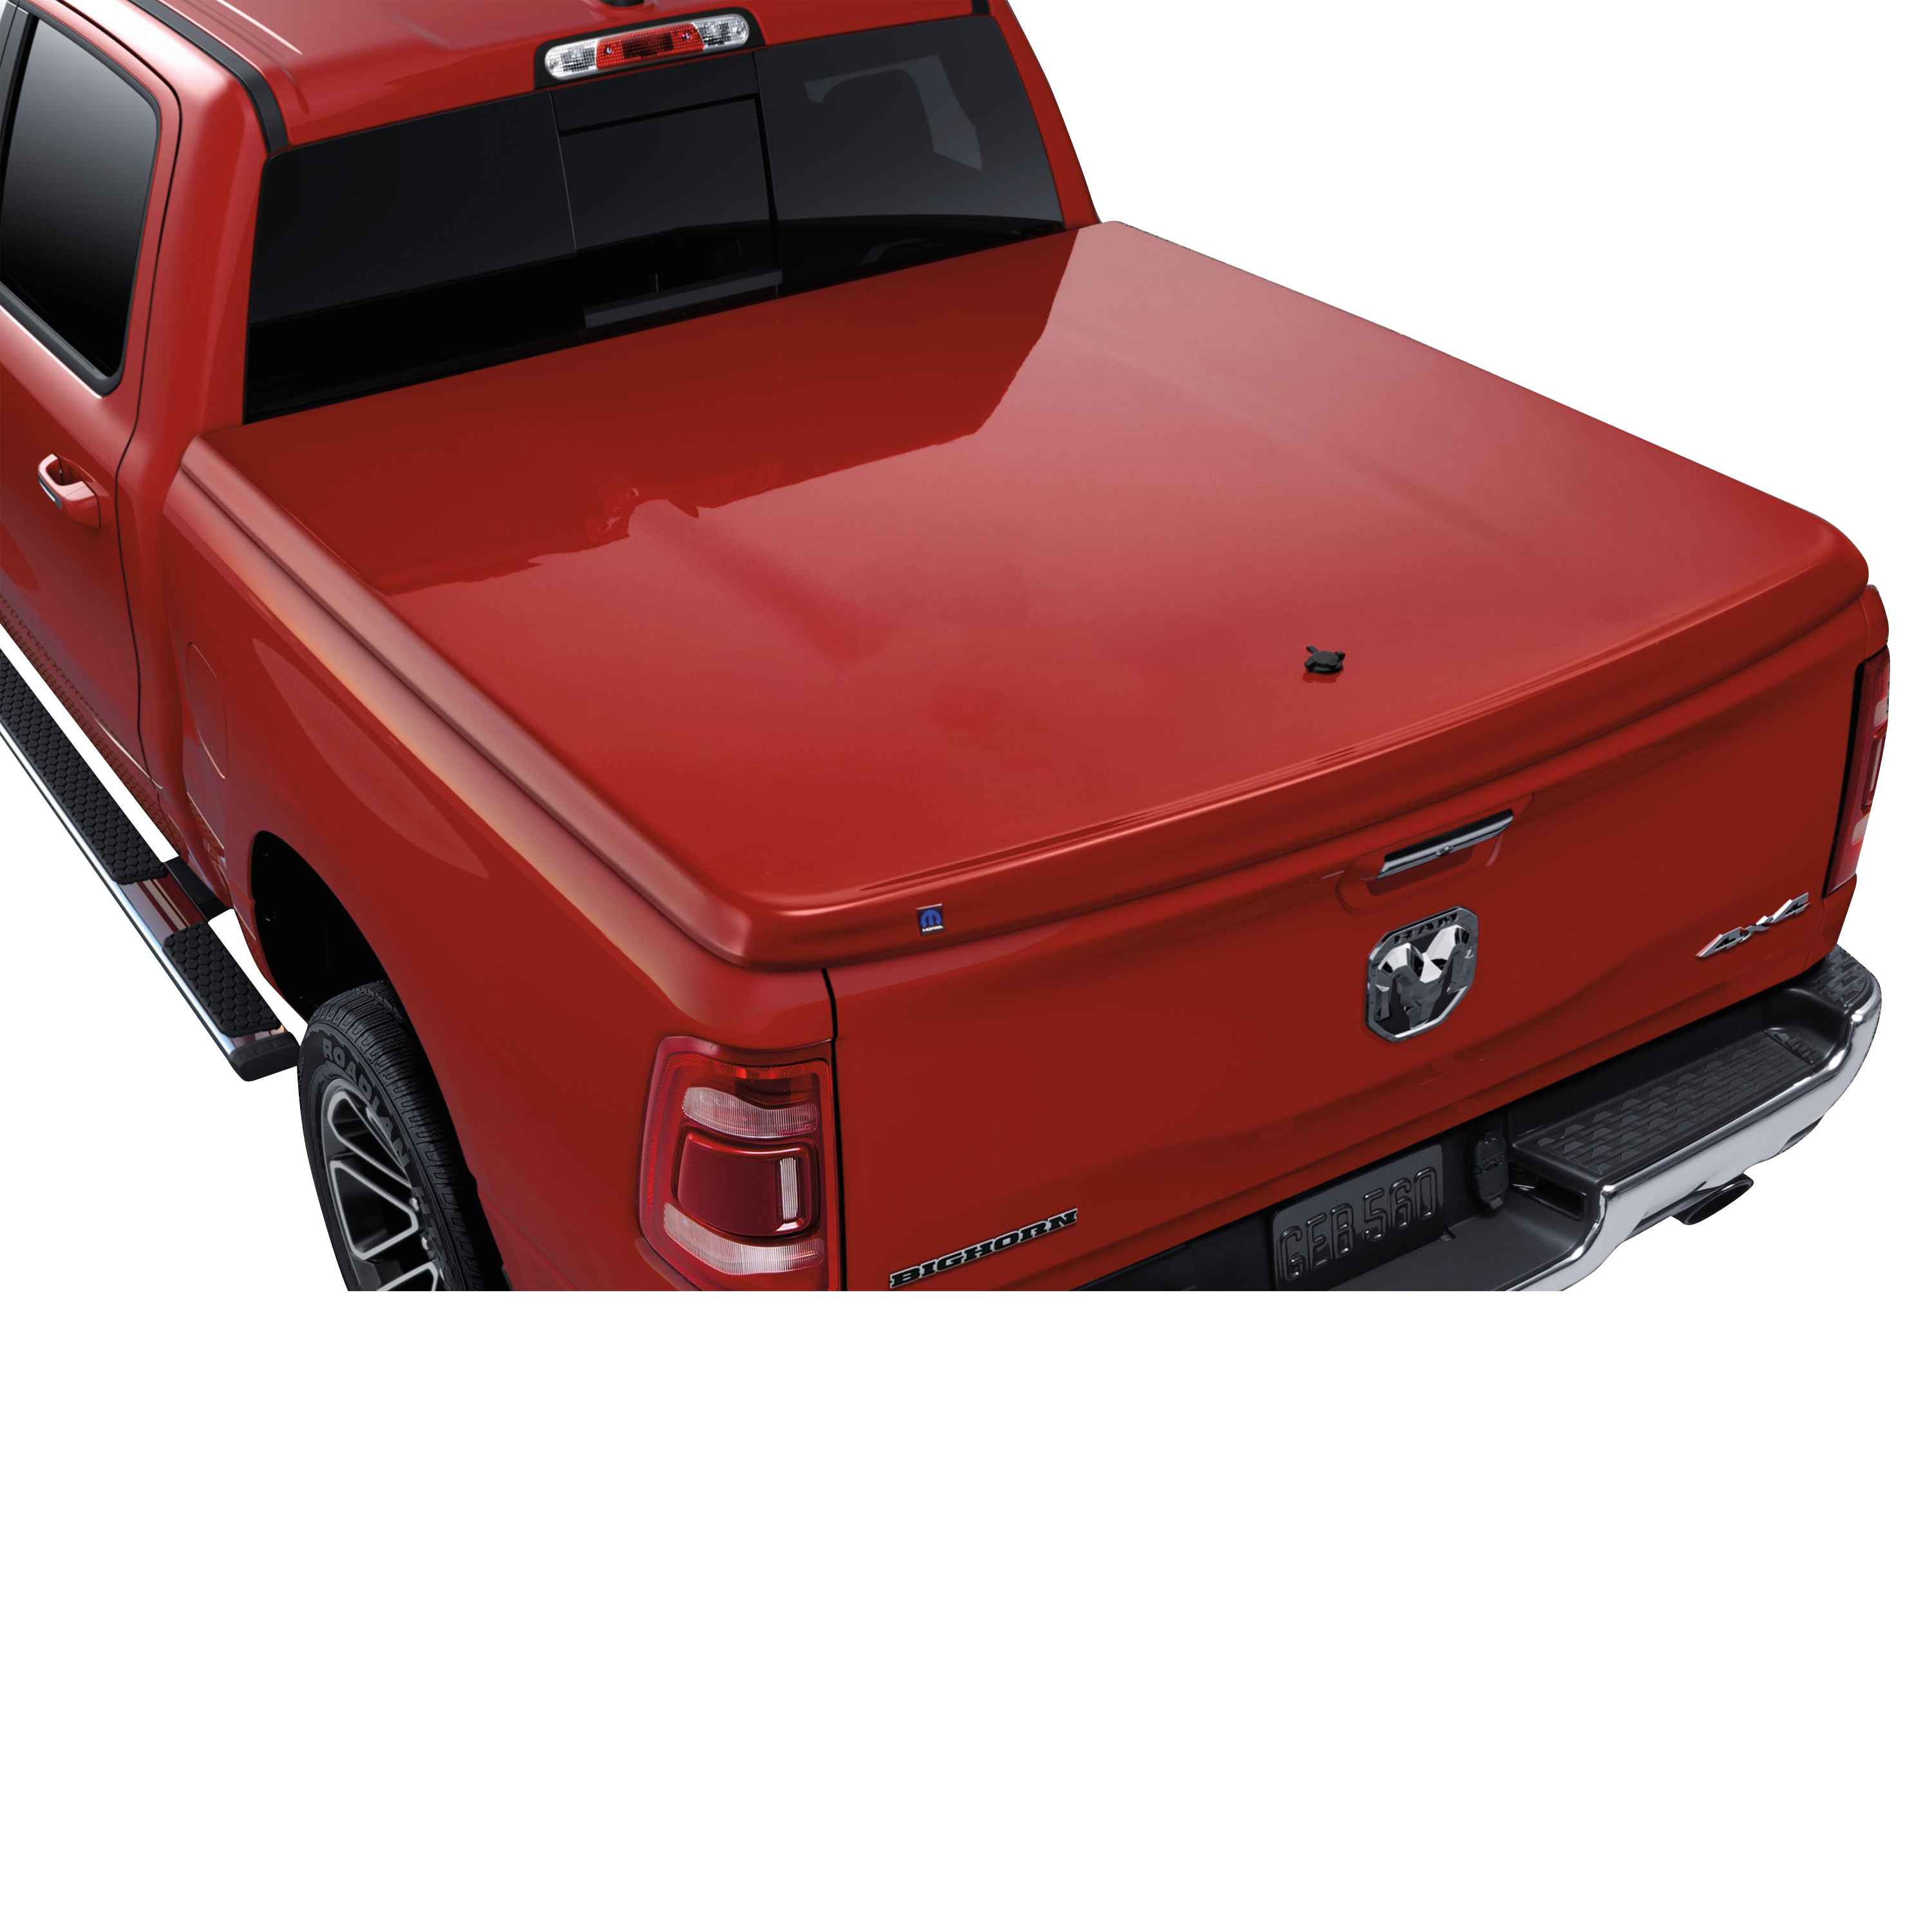 OEM 2019 Ram 1500 One-Piece Tonneau Cover in Body Color for 6' 4 Conventional Bed - Delmonico Red